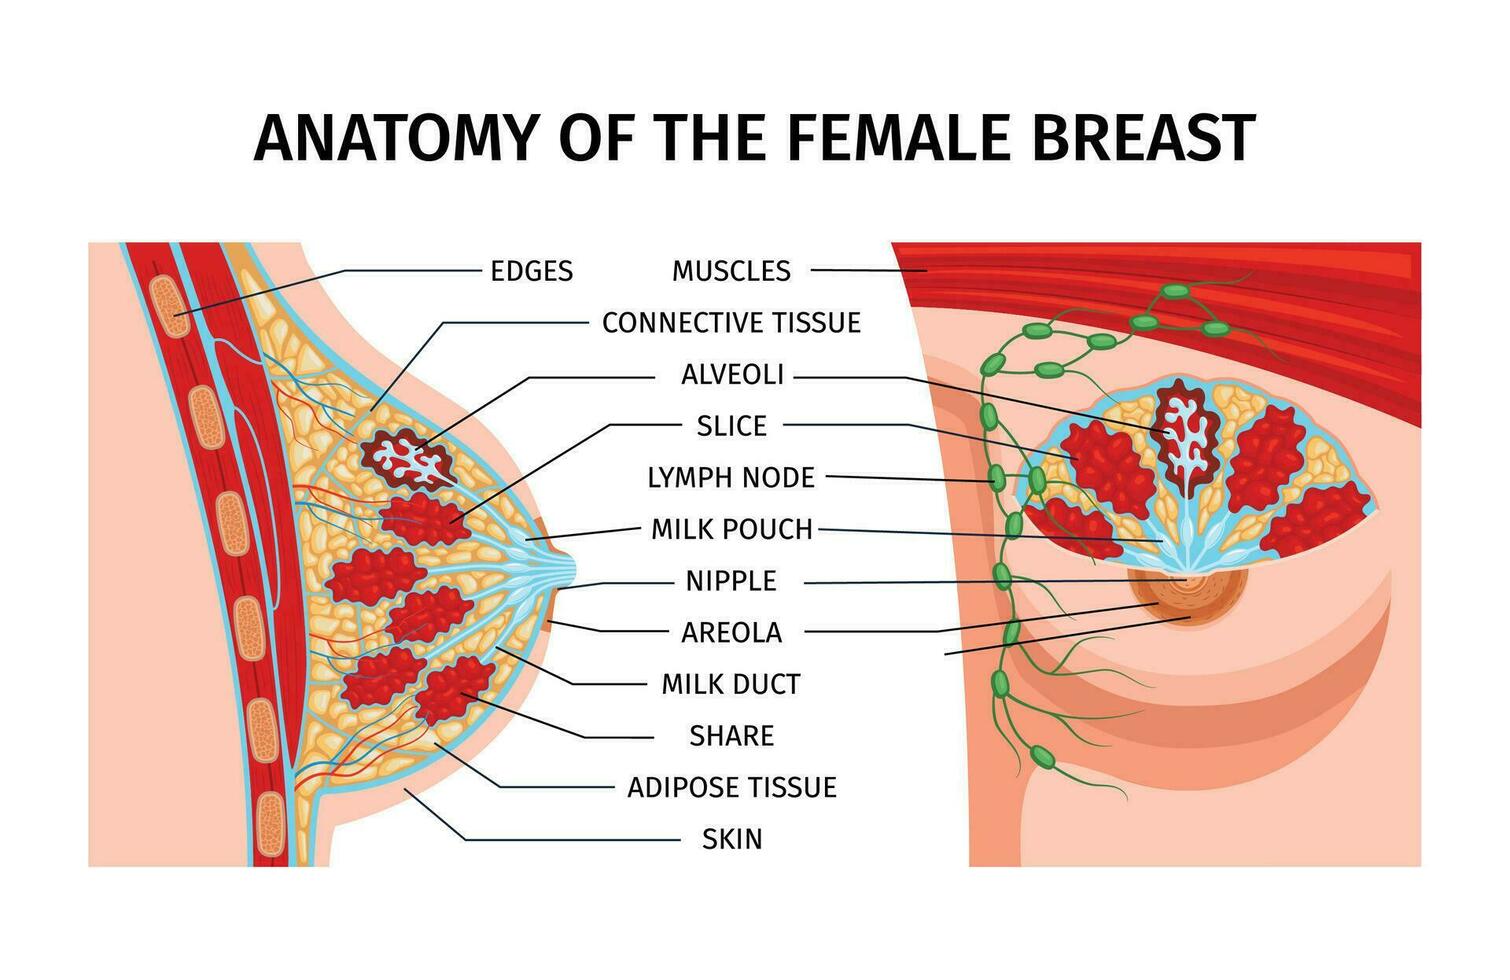 What elements or characteristics of female breast anatomy and morphology  impact perceptions of attractiveness? Read, Aesthetic Character